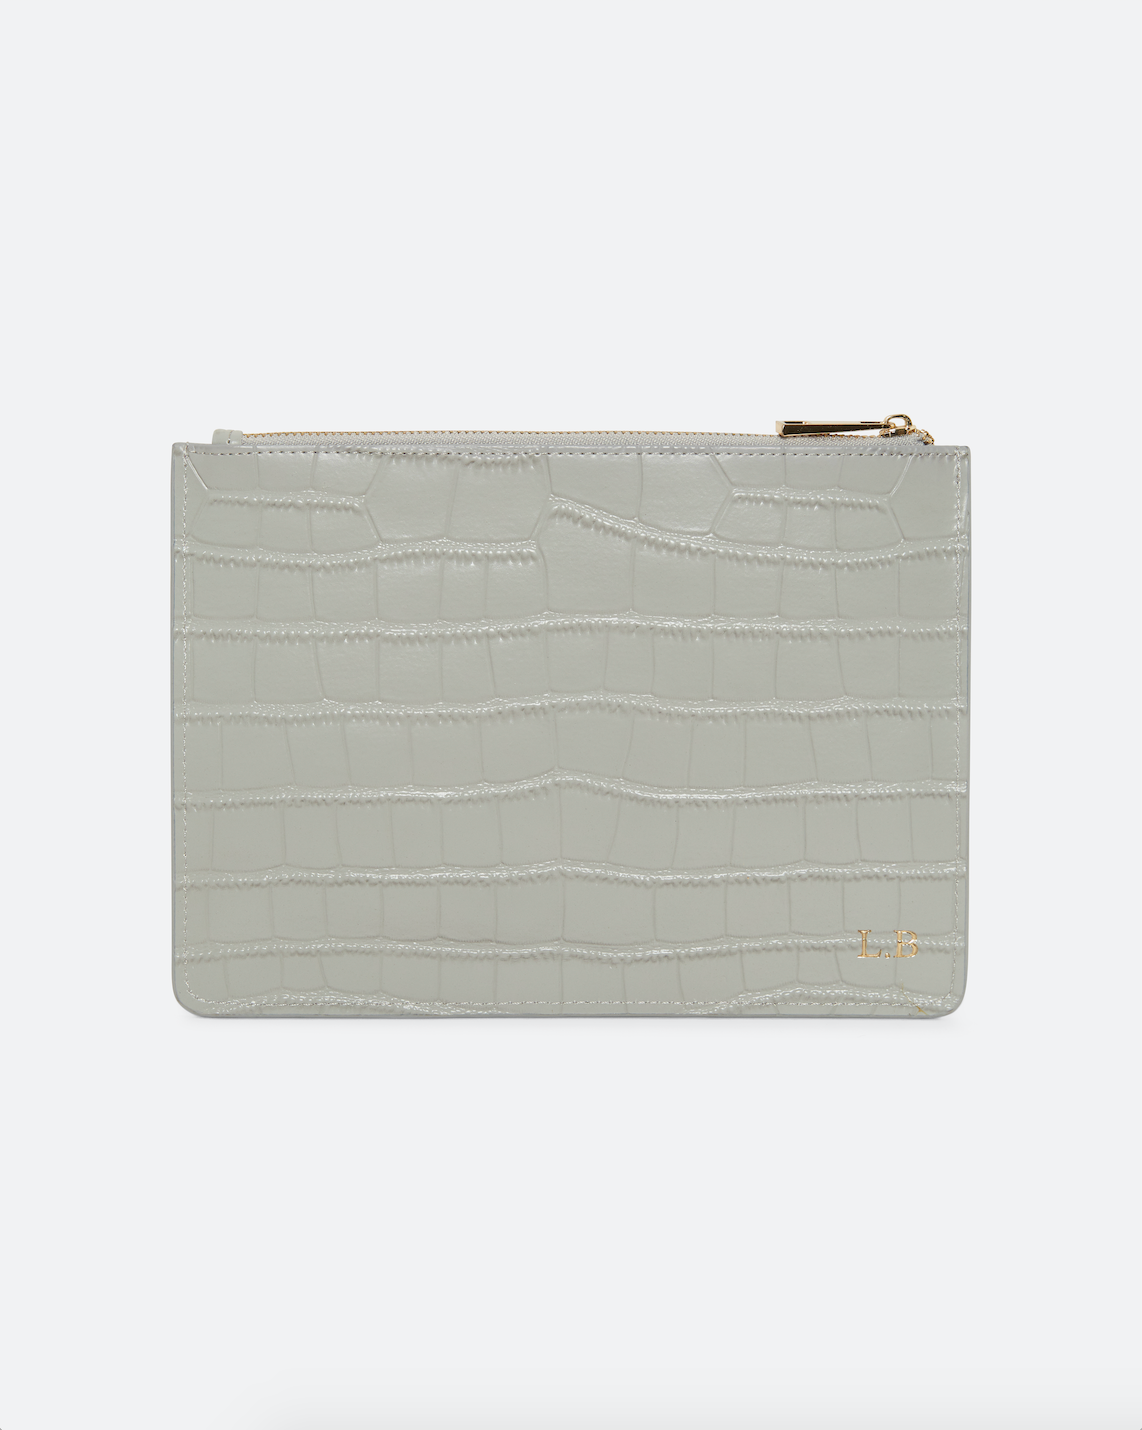 Personalised Mock Leather Clutch Bag in Grey